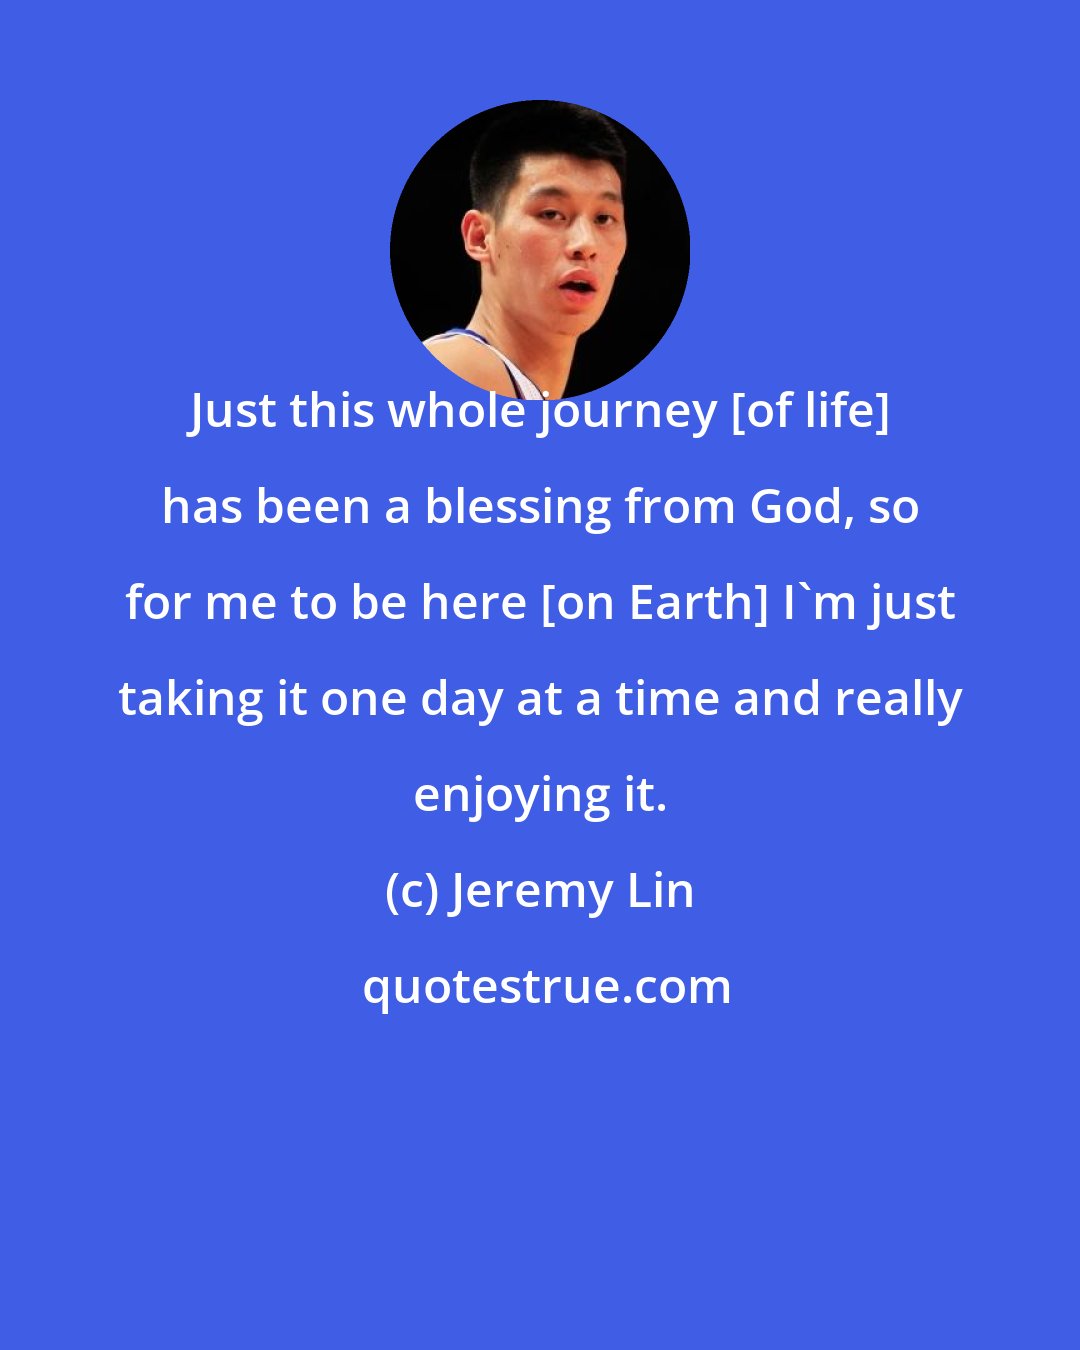 Jeremy Lin: Just this whole journey [of life] has been a blessing from God, so for me to be here [on Earth] I'm just taking it one day at a time and really enjoying it.